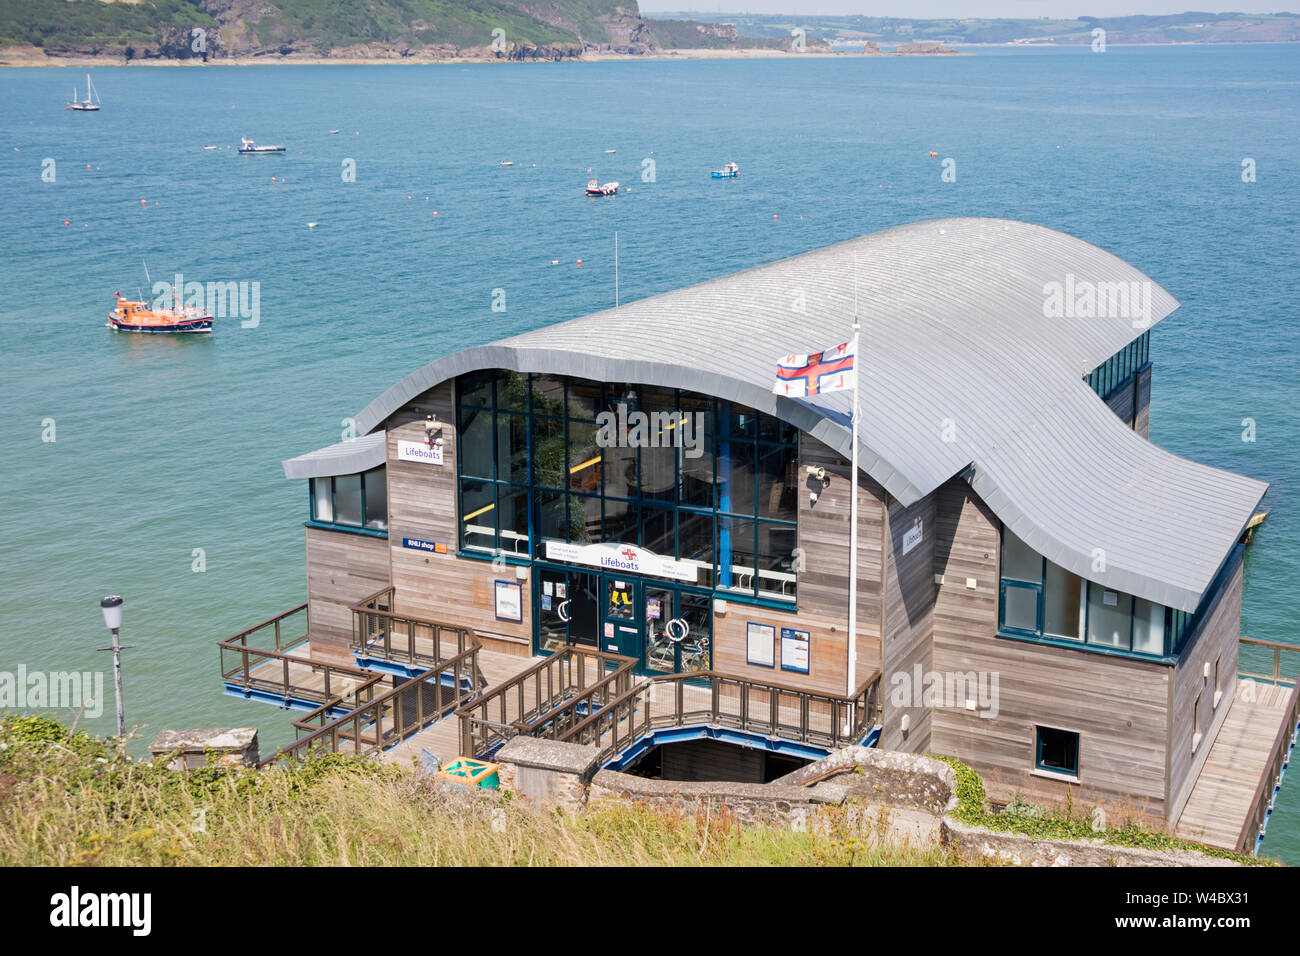 The RNLI lifeboat station in the Welsh coastal town of Tenby, Pembrokeshire, Wales, UK Stock Photo